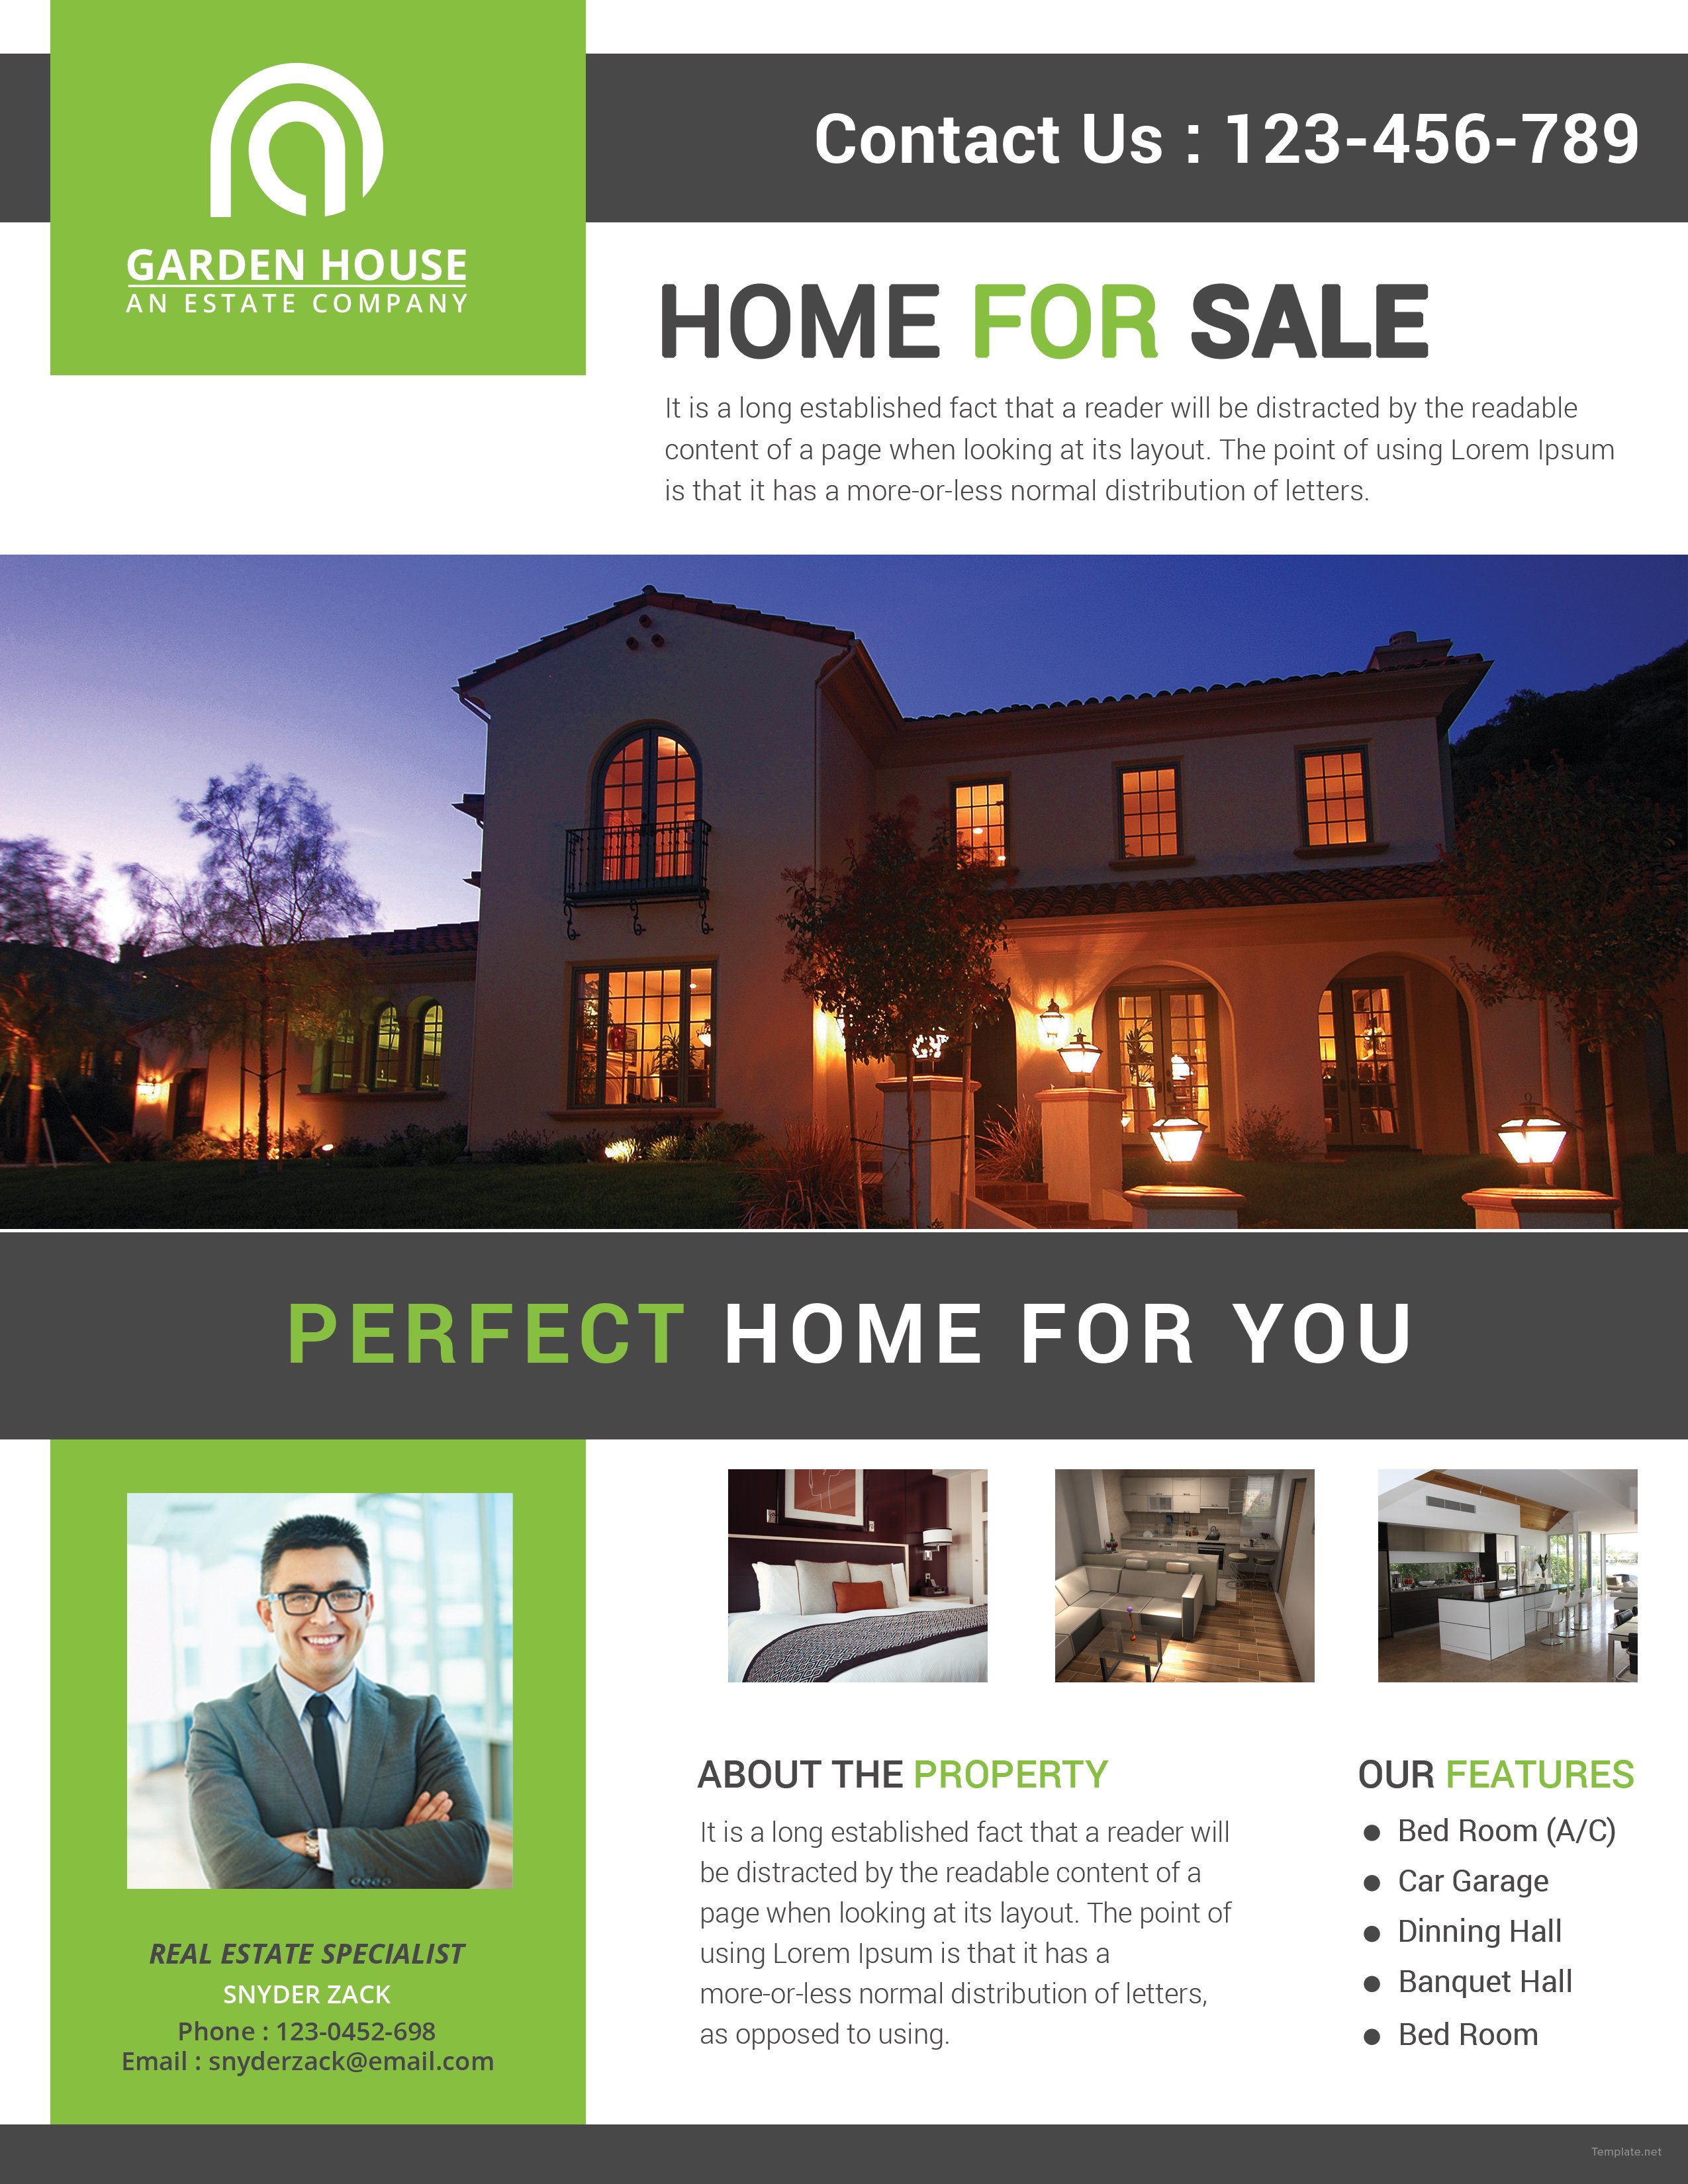 Home Sale Real Estate Flyer Template In Adobe Photoshop Illustrator Microsoft Word Publisher